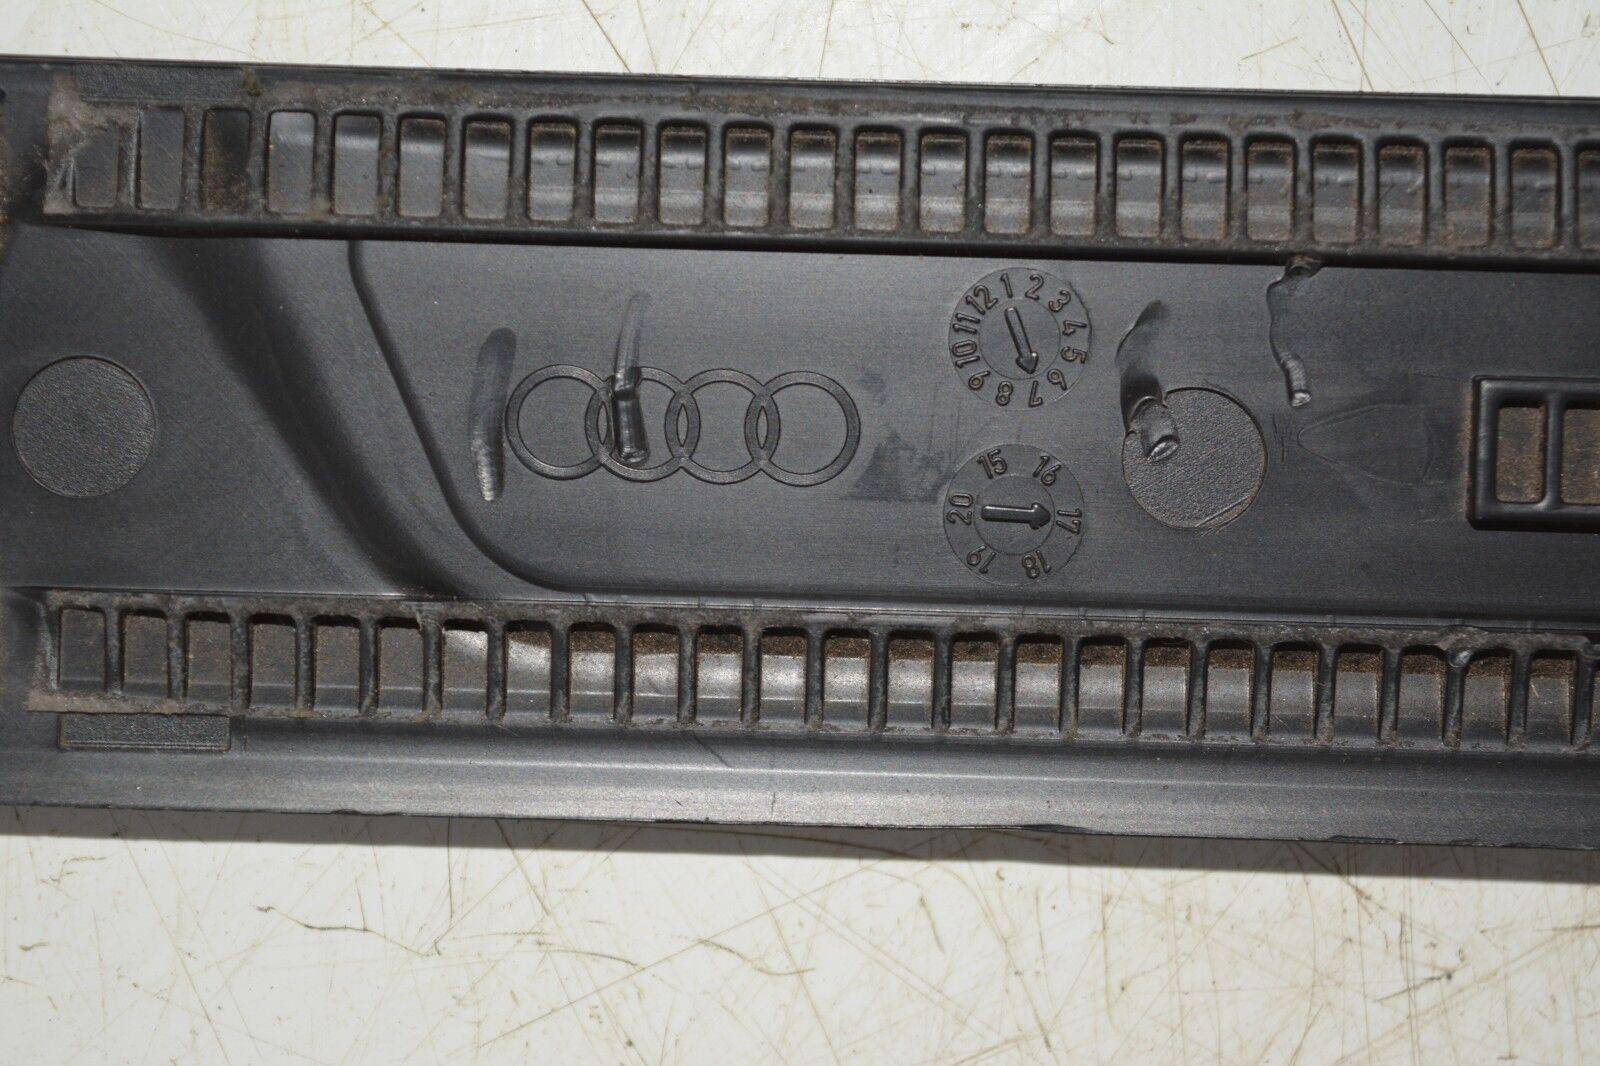 AUDI-A4-DOOR-SILL-ENTRY-TRIM-FRONT-LEFT-2015-2018-175367529874-9